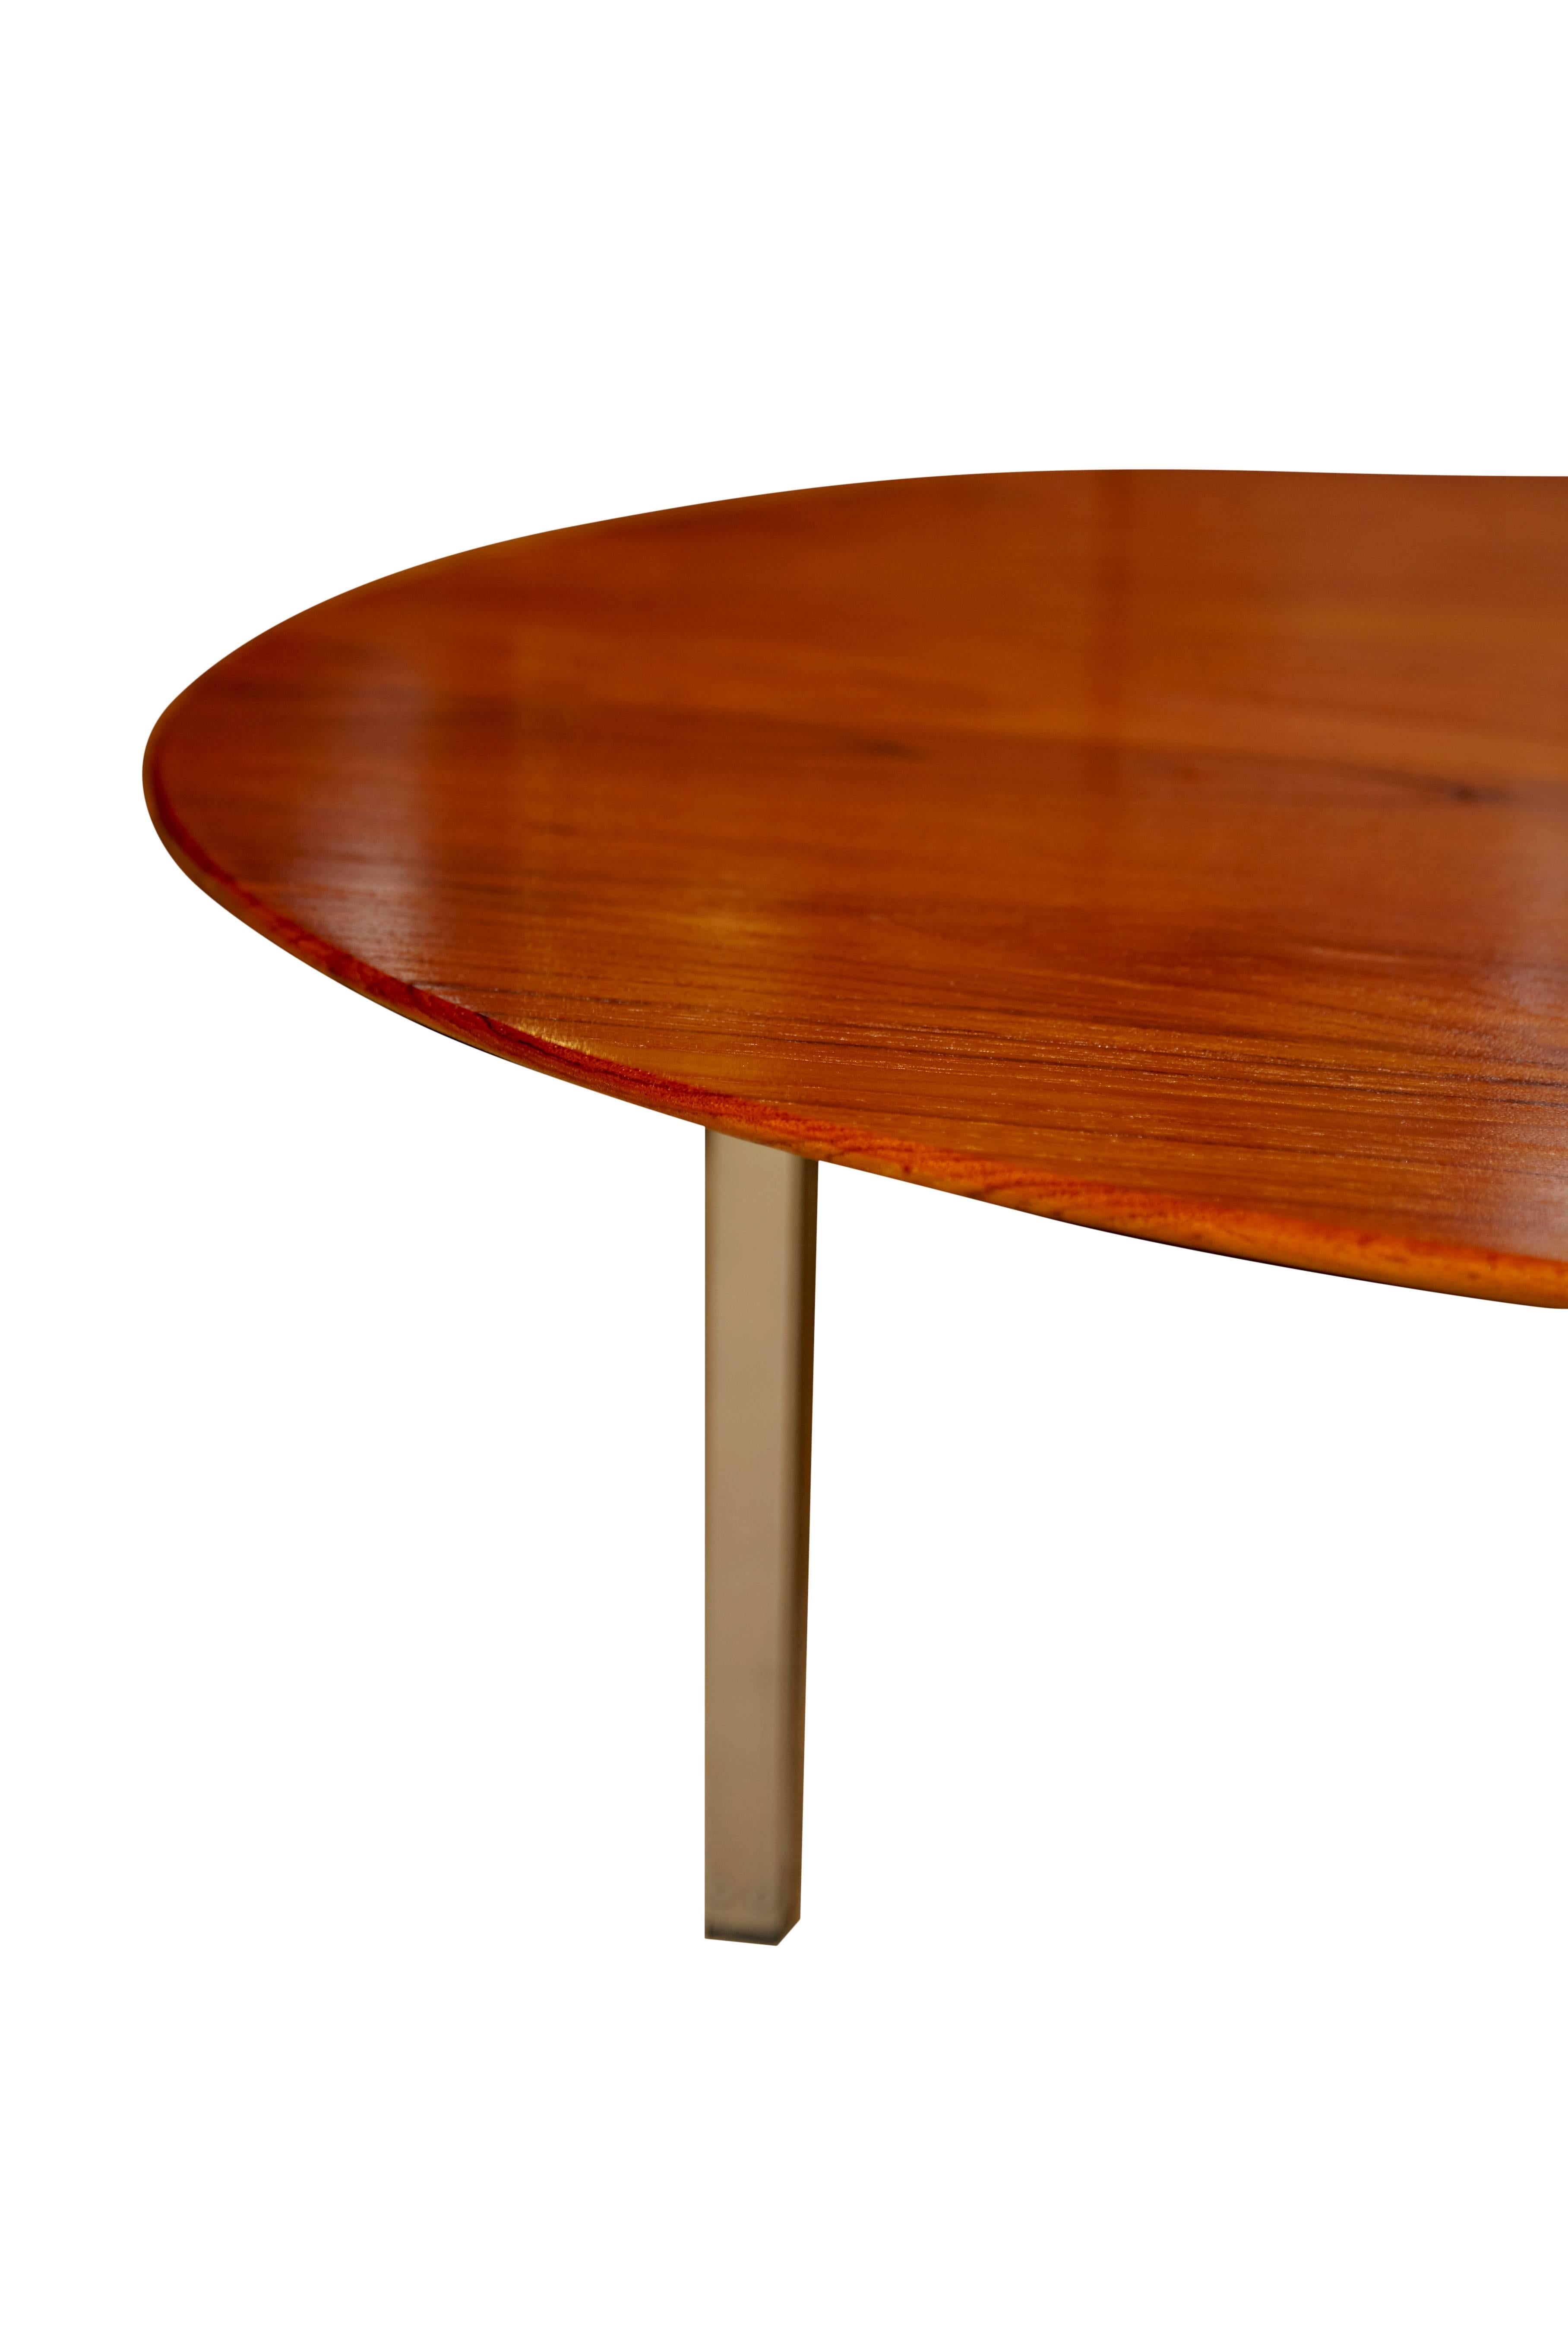 American Florence Knoll Parallele Bar Teak Cocktail Table For Sale